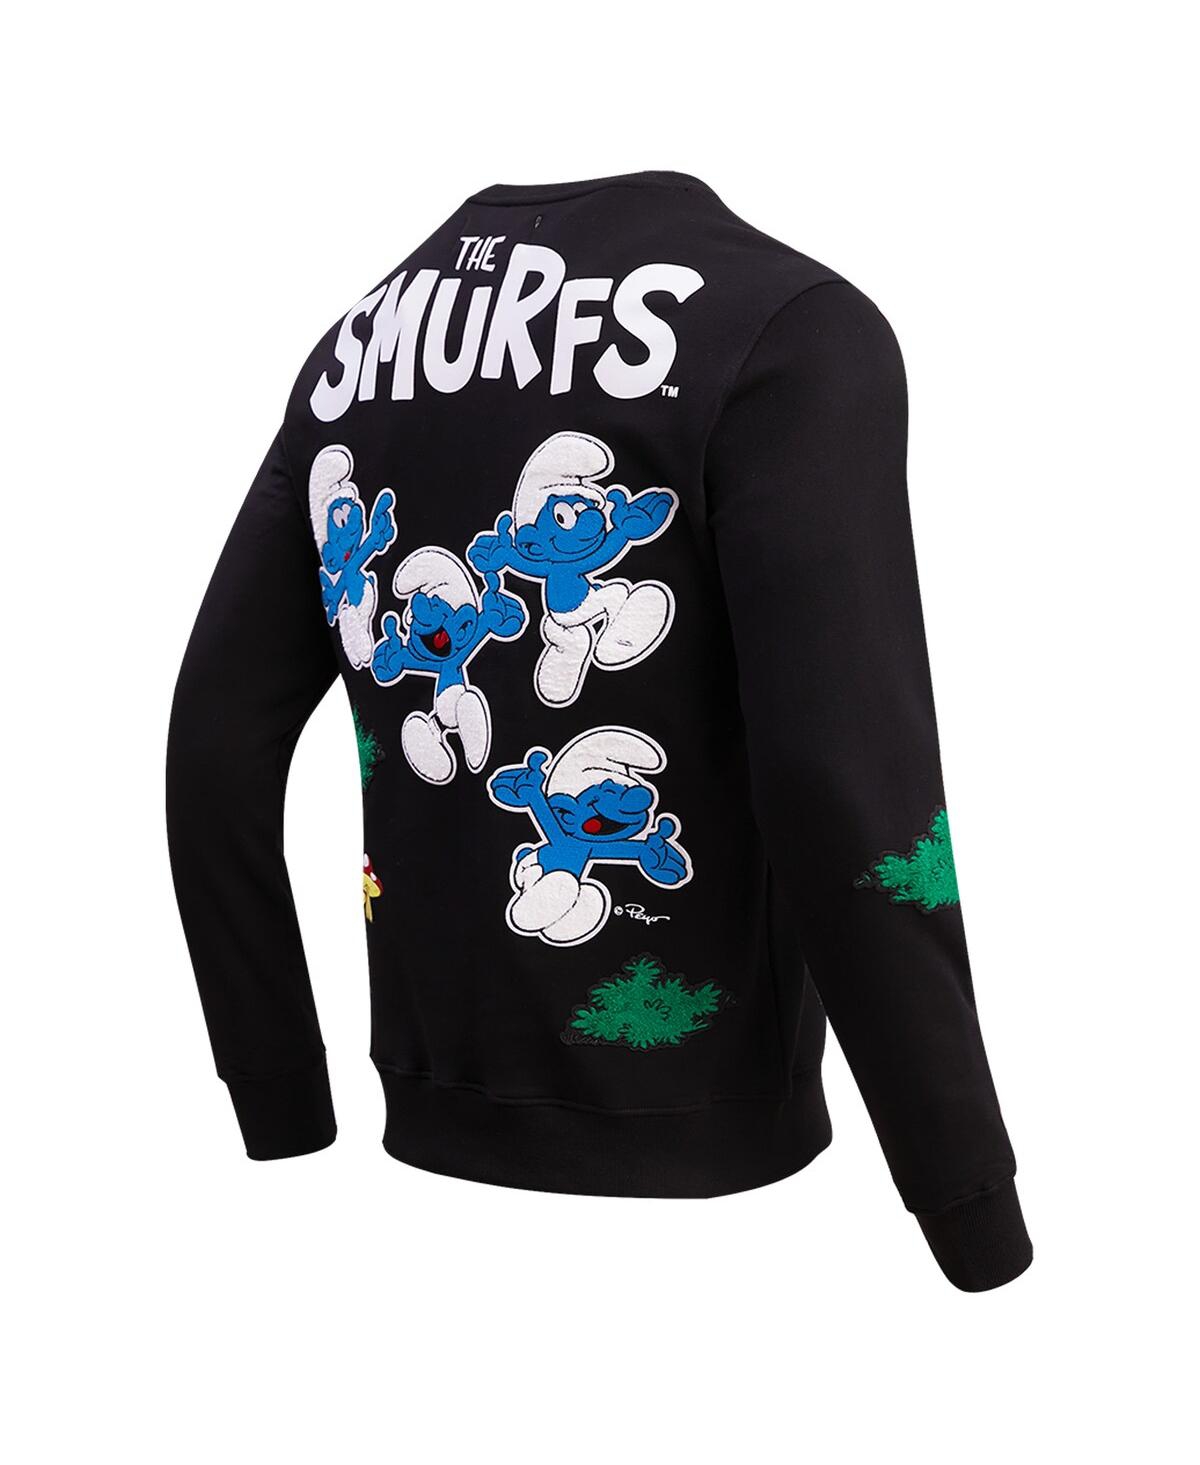 Shop Freeze Max Men's And Women's  Black The Smurfs Jumping Pullover Sweatshirt